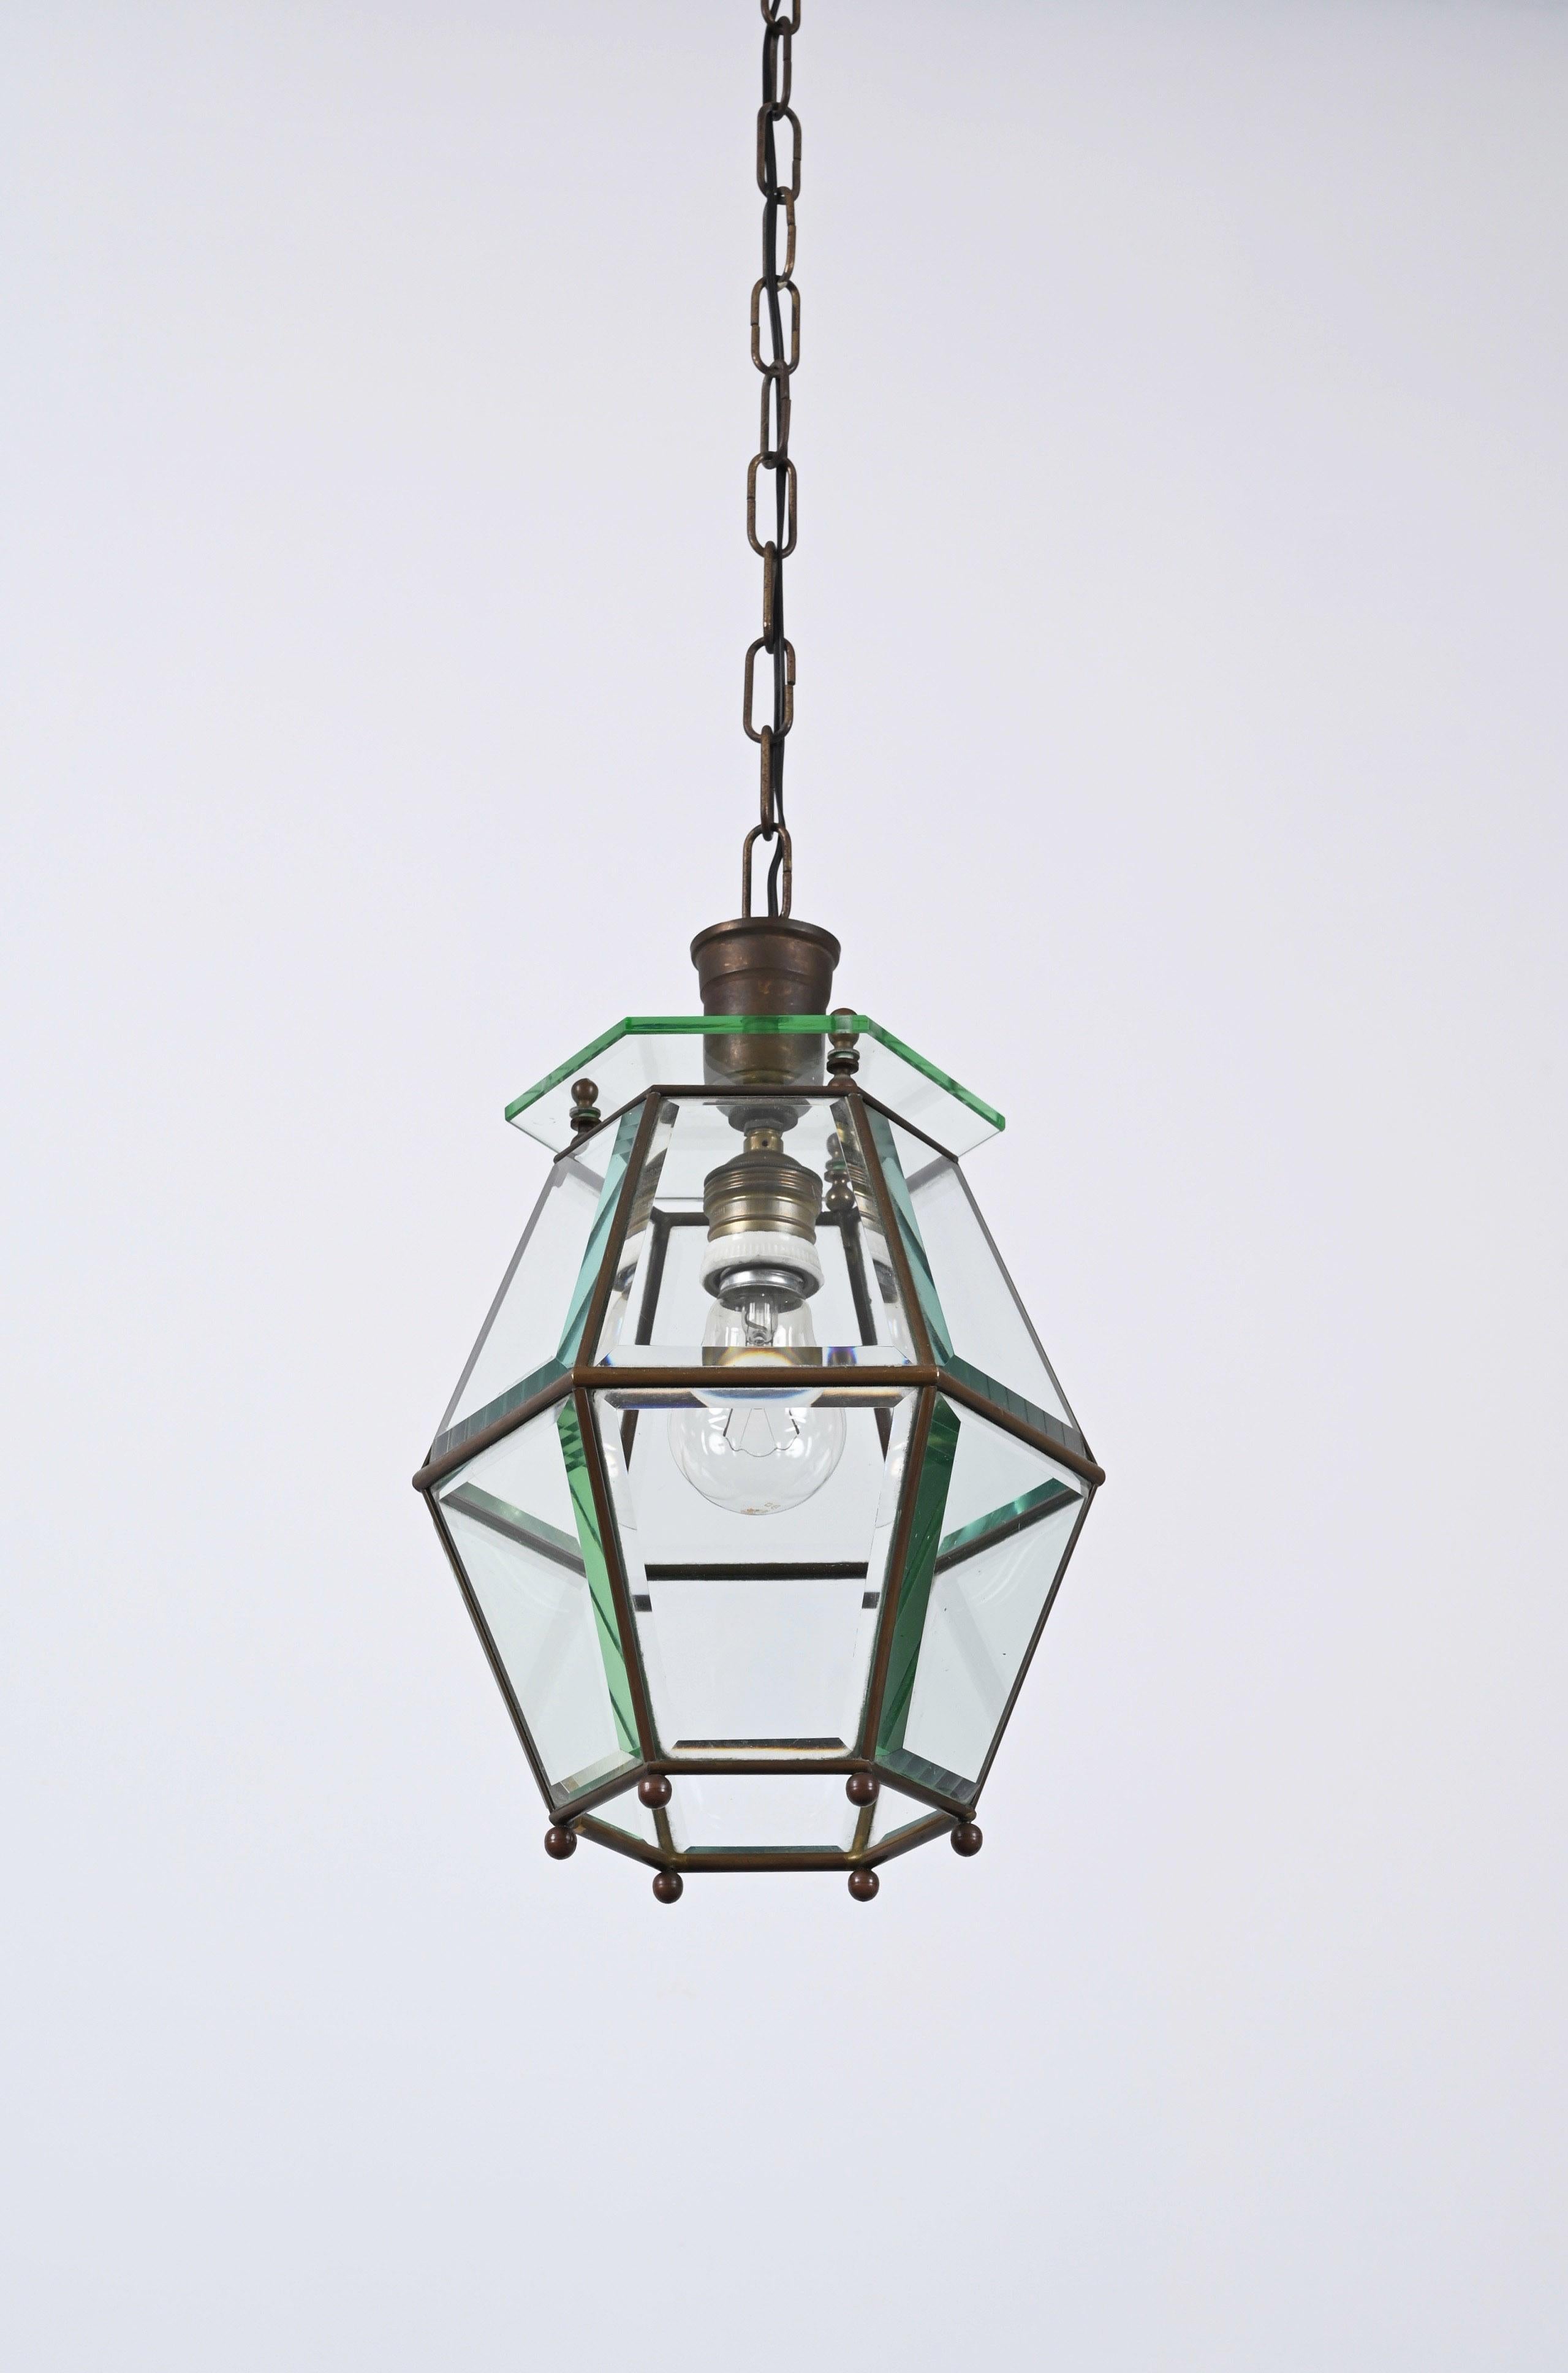 Astonishing brass and bevelled glass hexagonal chandelier. This amazing pendant light was designed in Italy and inspired by the work of Adolf Loos during the 1950s.

This piece is fantastic thanks to a marvellous and clear suspension showing twelve